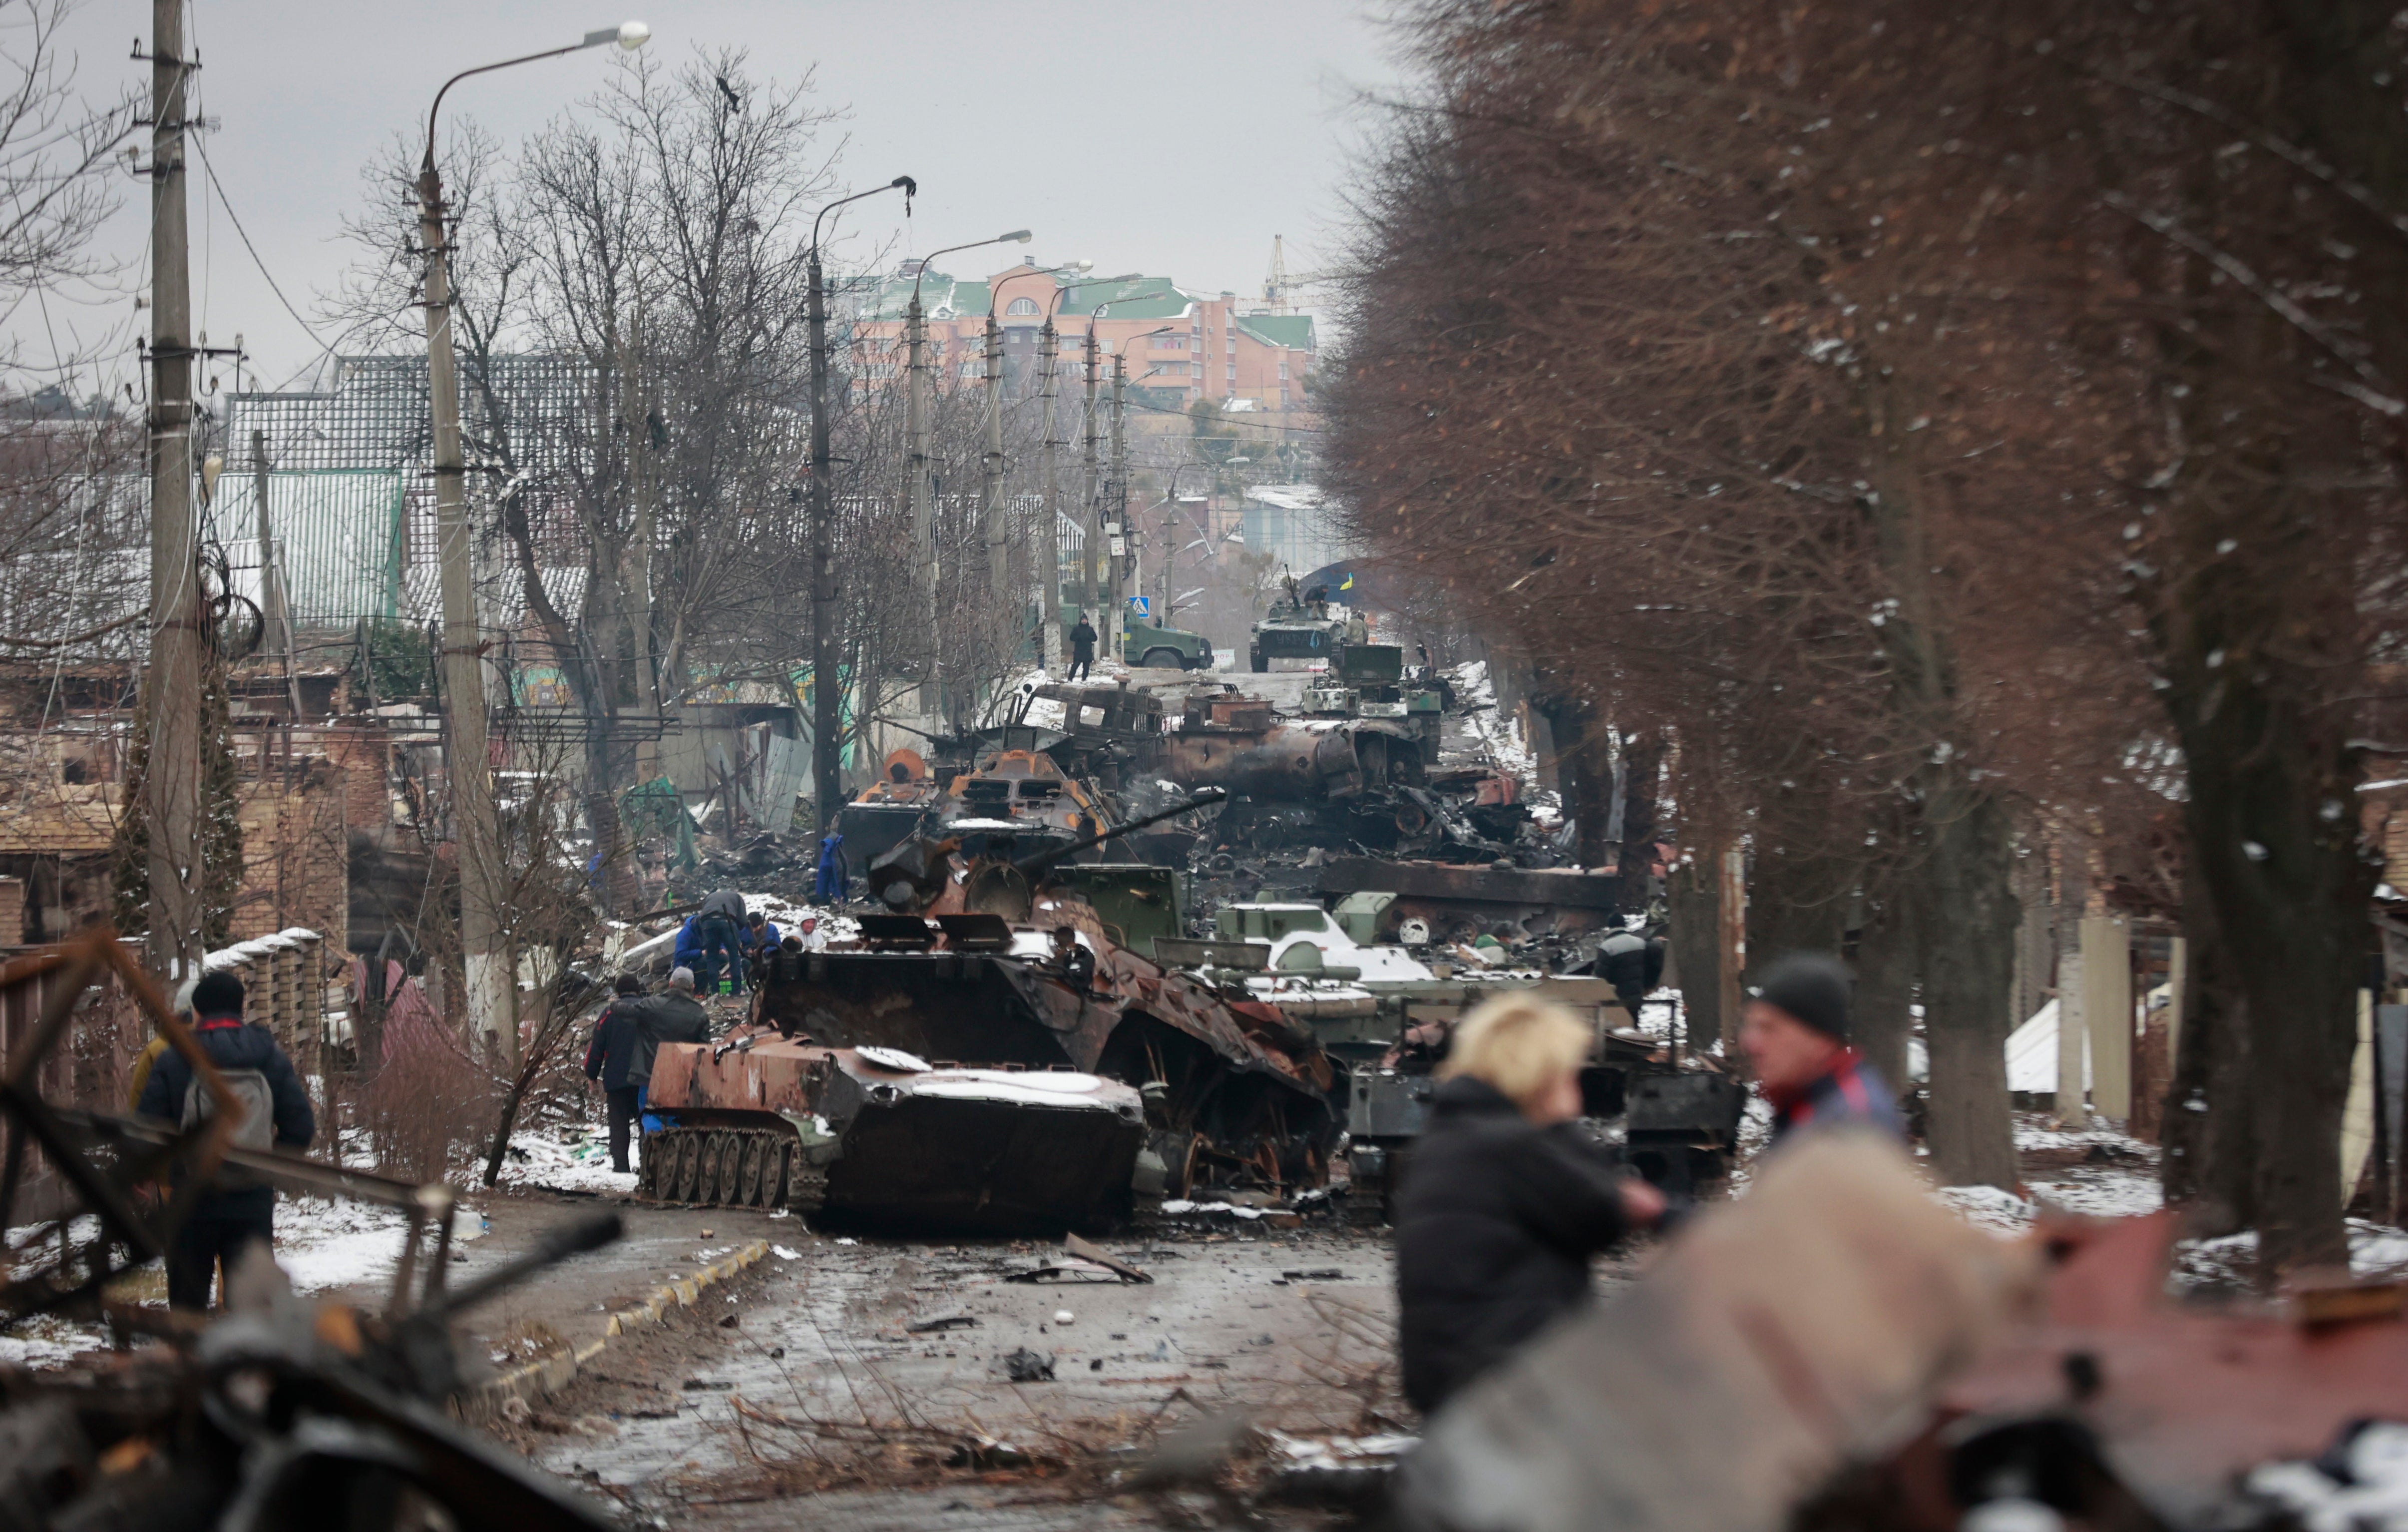 People look at the gutted remains of Russian military vehicles on a road in the town of Bucha, close to Ukraine’s capital Kyiv, on 1 March 2022